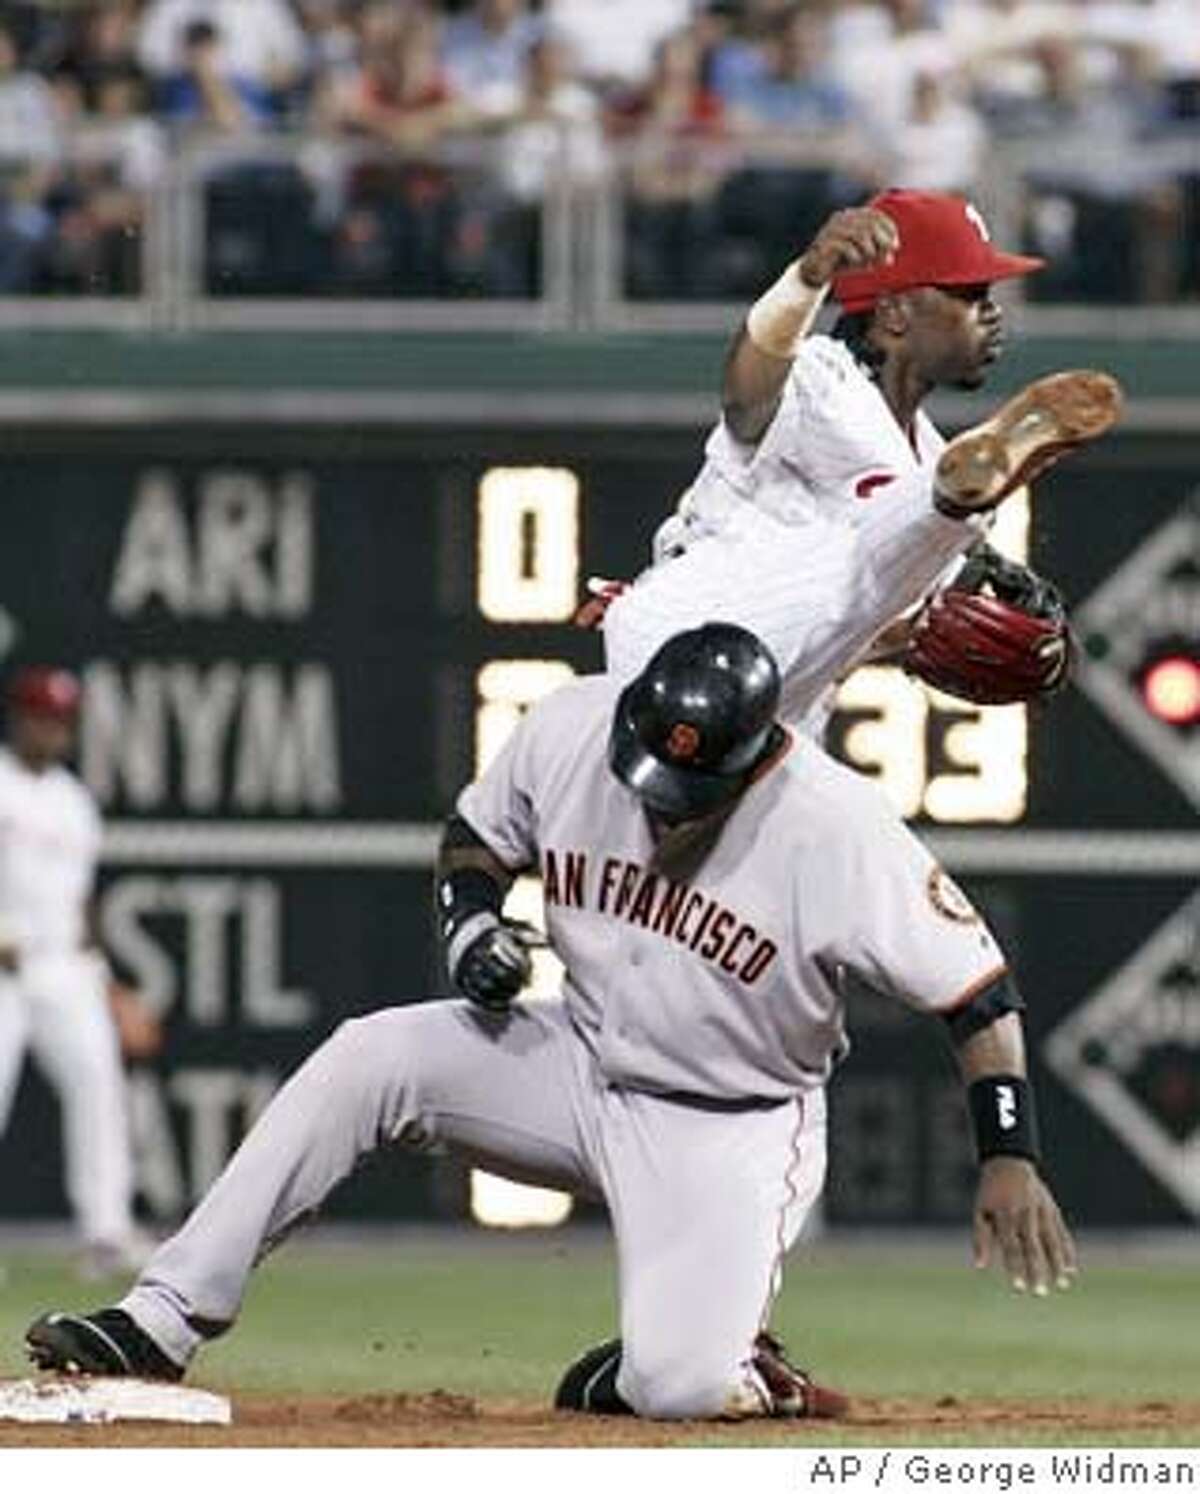 Philadelphia Phillies shortstop Jimmy Rollins gets a leg above San Francisco Giants' Barry Bonds, who was forced out at second base on a grounder by Michael Tucker in the third inning Friday, Aug. 13, 2004, in Philadelphia. J.T. Snow scored on the play. Tucker was safe at first. (AP Photo/George Widman)